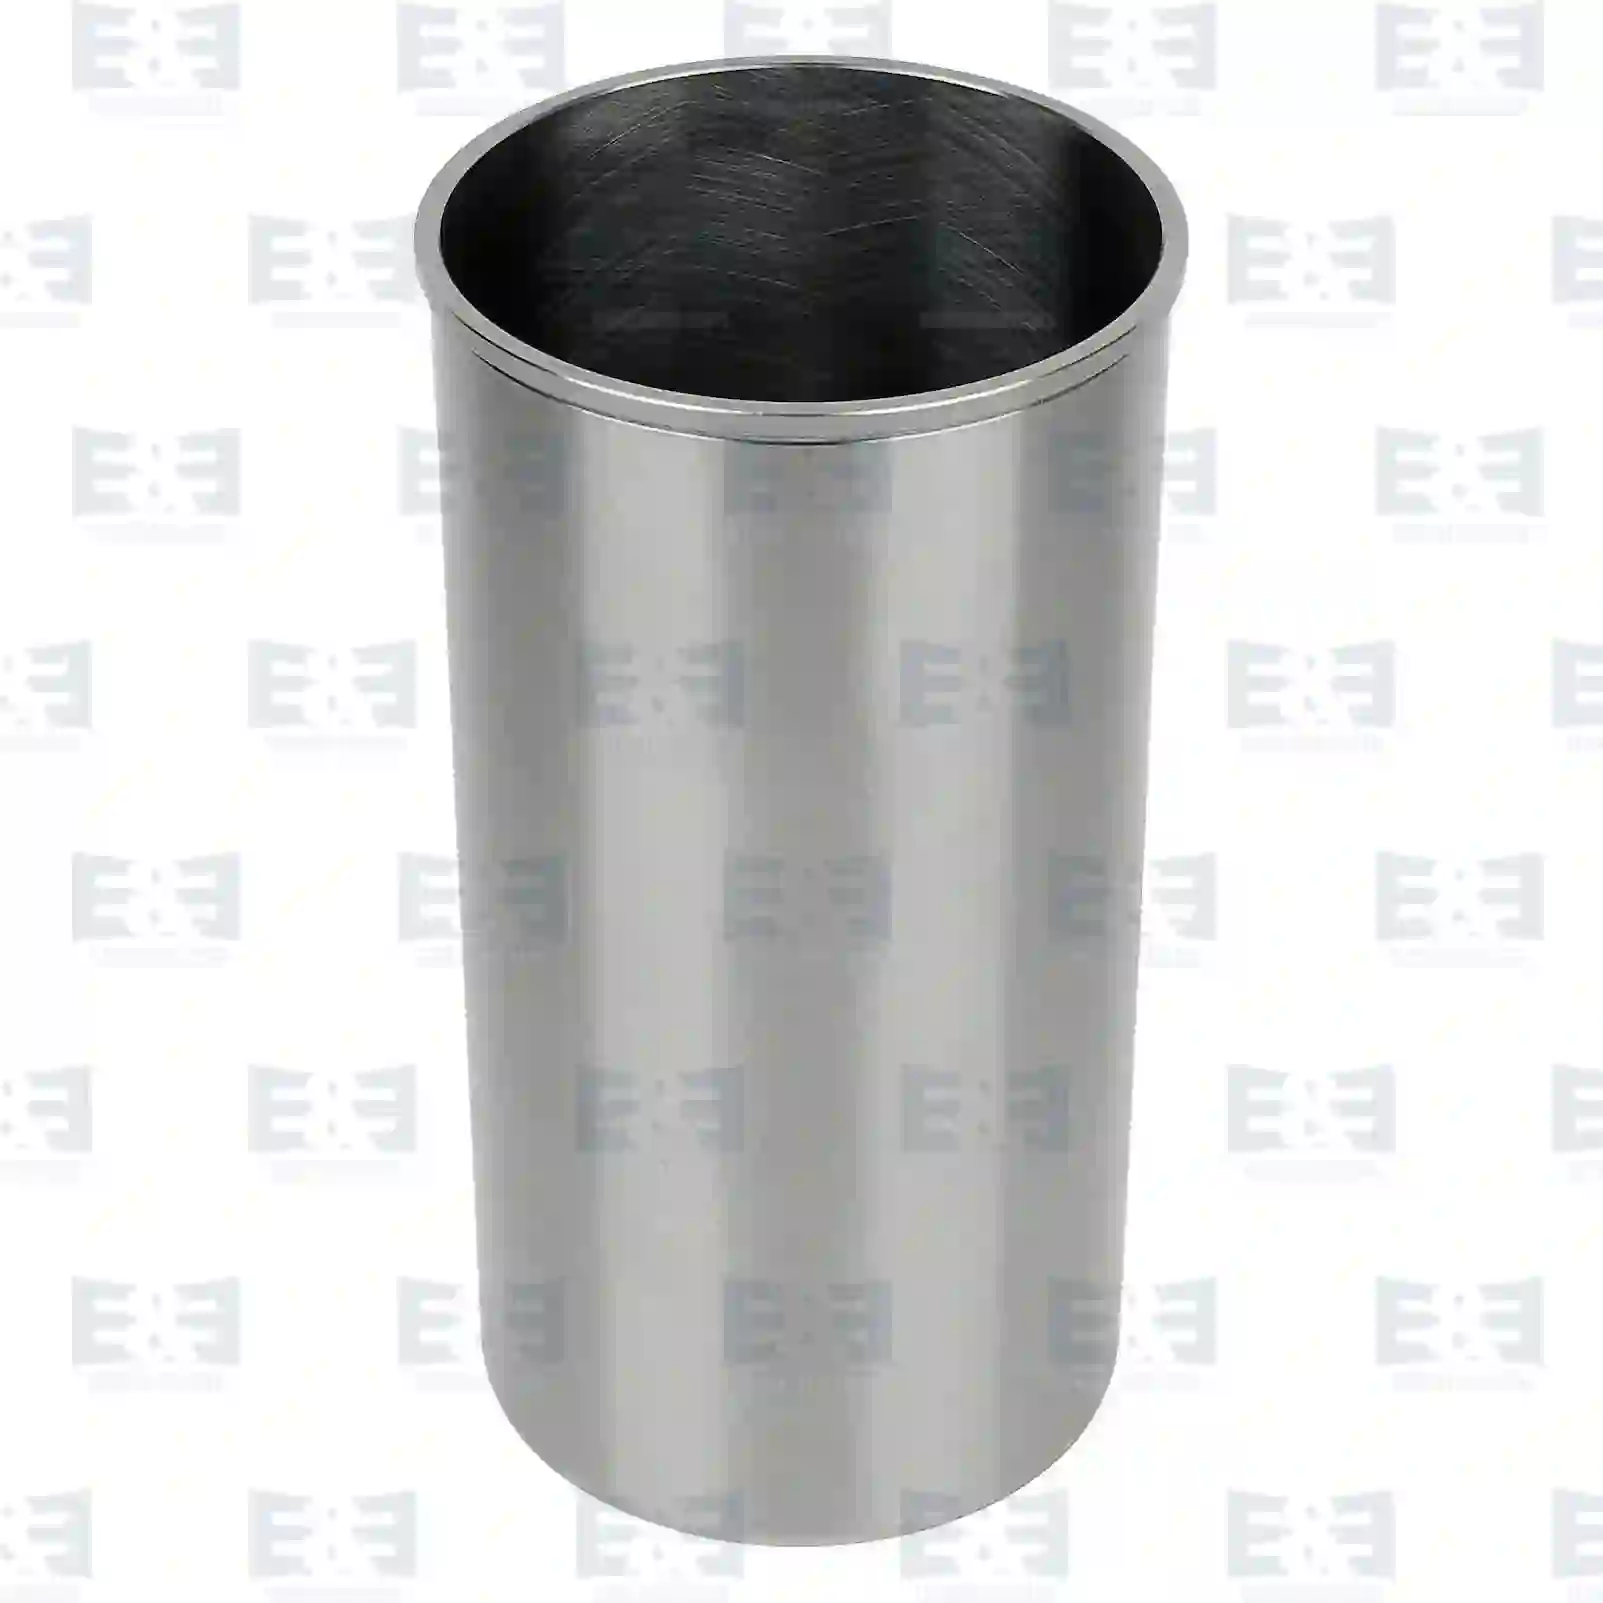 Cylinder liner, without seal rings, 2E2209900, 51012010321, 51012010379, 51012010400 ||  2E2209900 E&E Truck Spare Parts | Truck Spare Parts, Auotomotive Spare Parts Cylinder liner, without seal rings, 2E2209900, 51012010321, 51012010379, 51012010400 ||  2E2209900 E&E Truck Spare Parts | Truck Spare Parts, Auotomotive Spare Parts